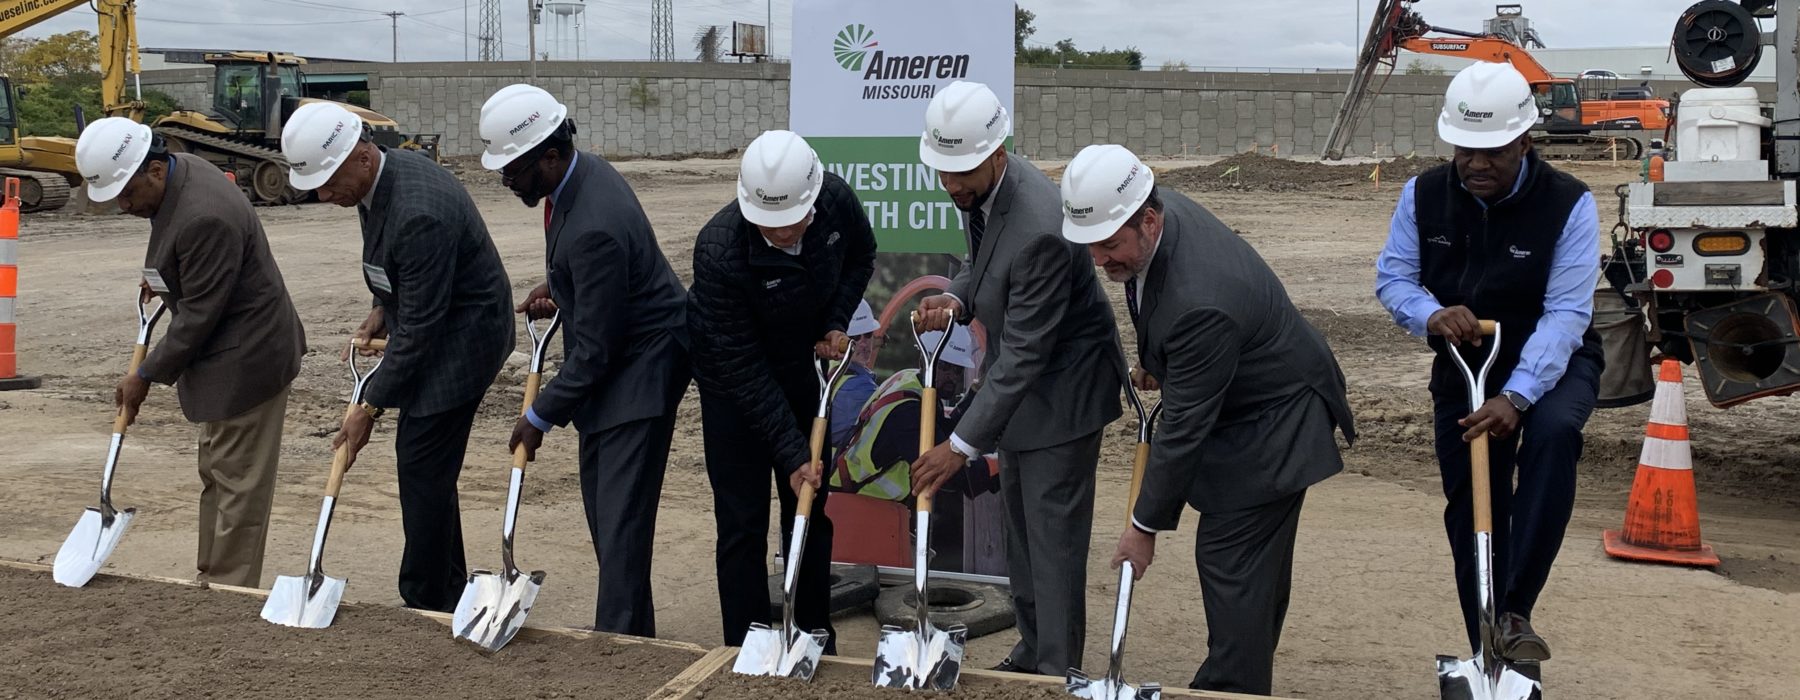 Leaders in KAI/PARIC construction hats shoveling dirt at the Ameren Missouri Operating Center groundbreaking ceremony